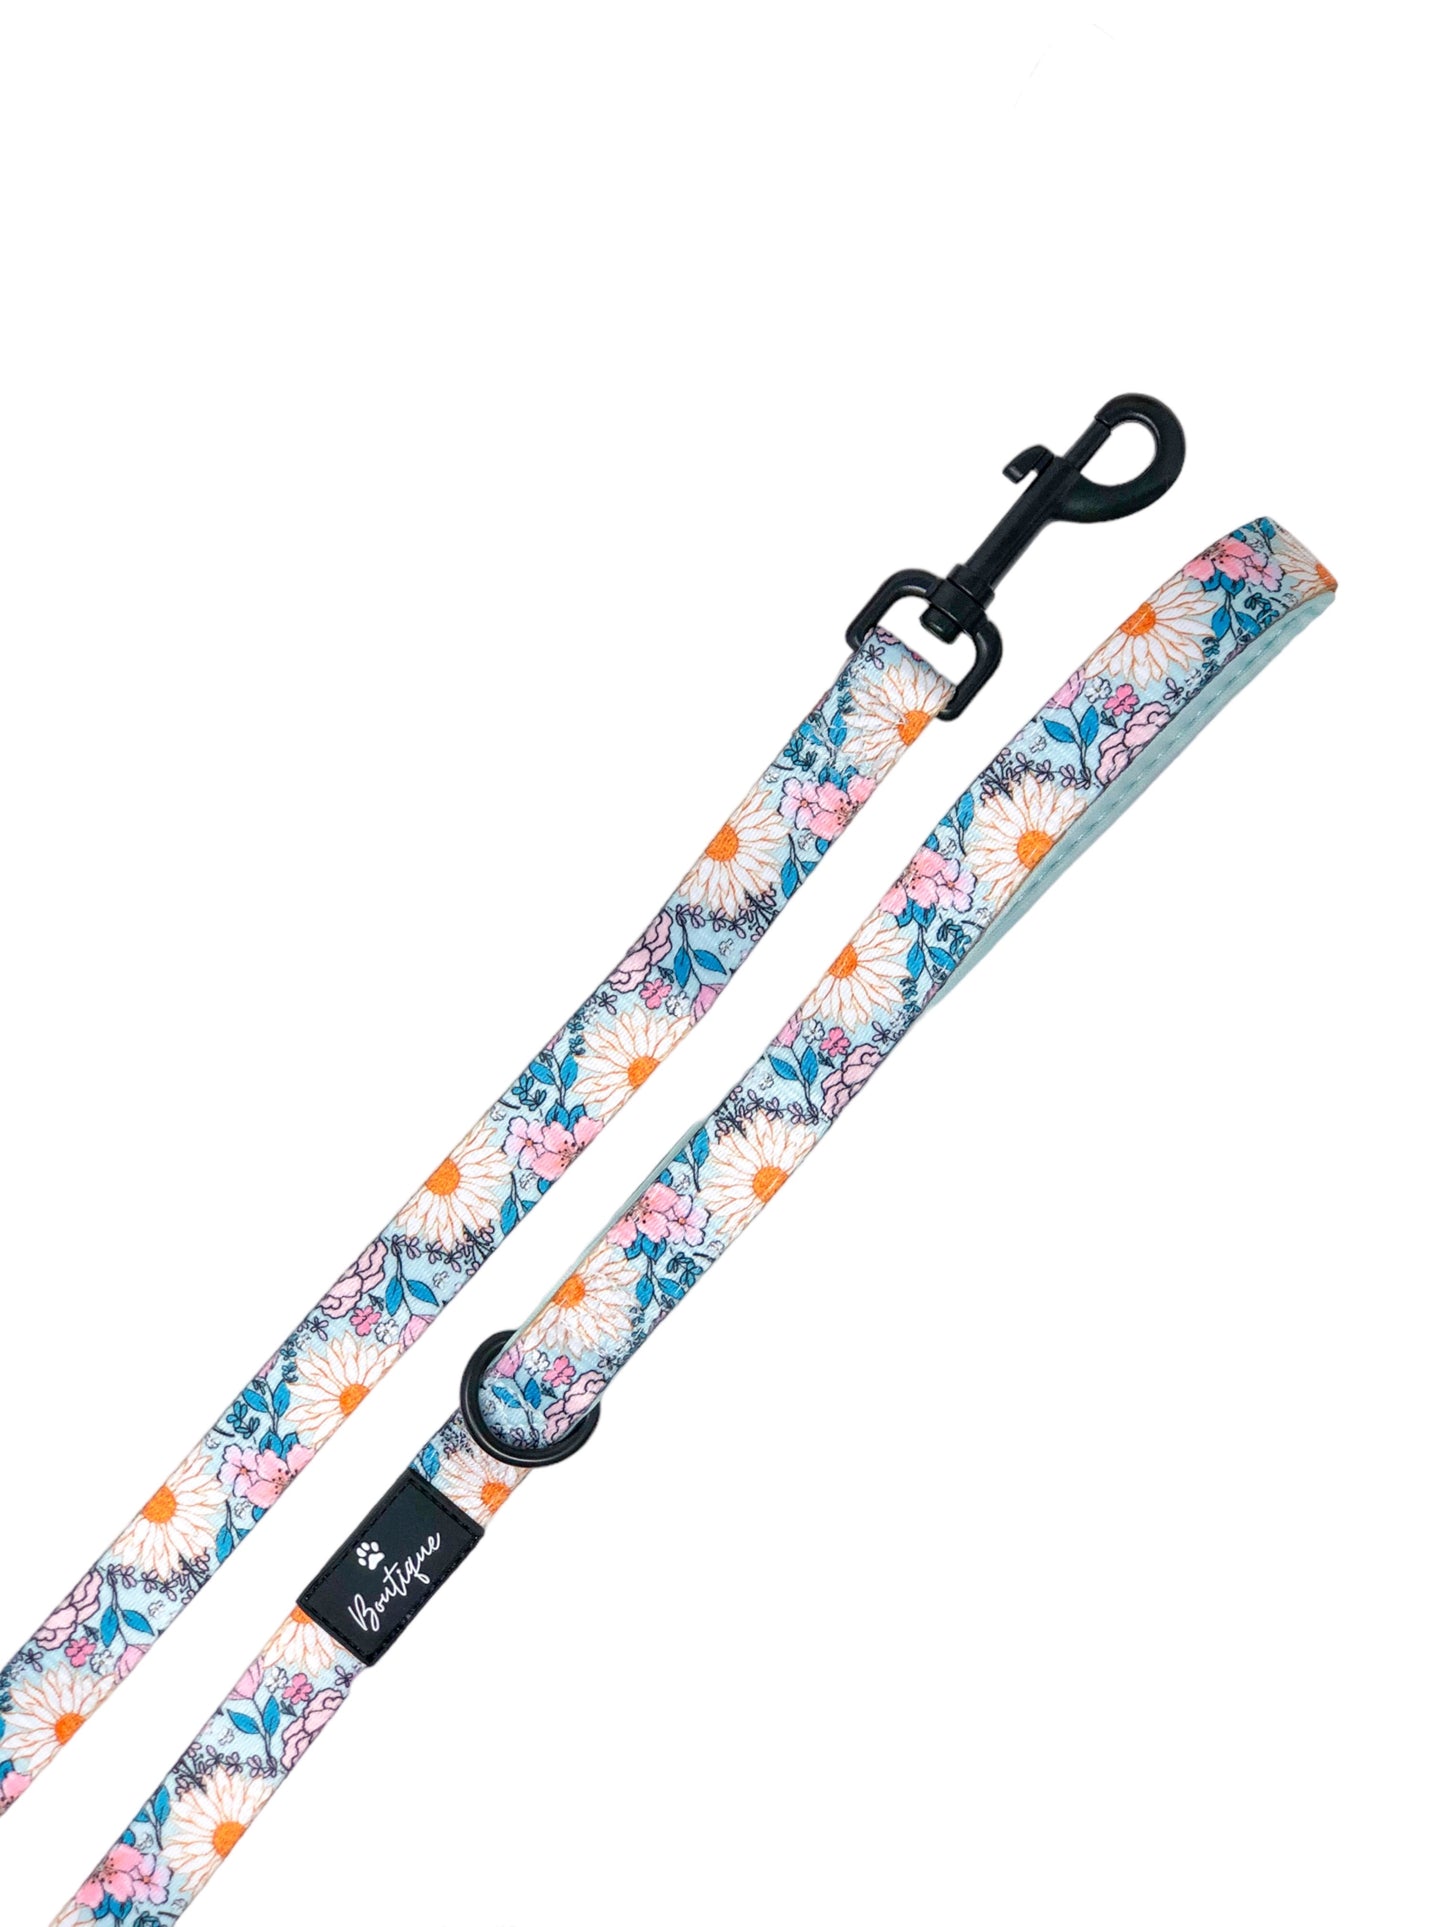 The Fabulous in Floral Lead